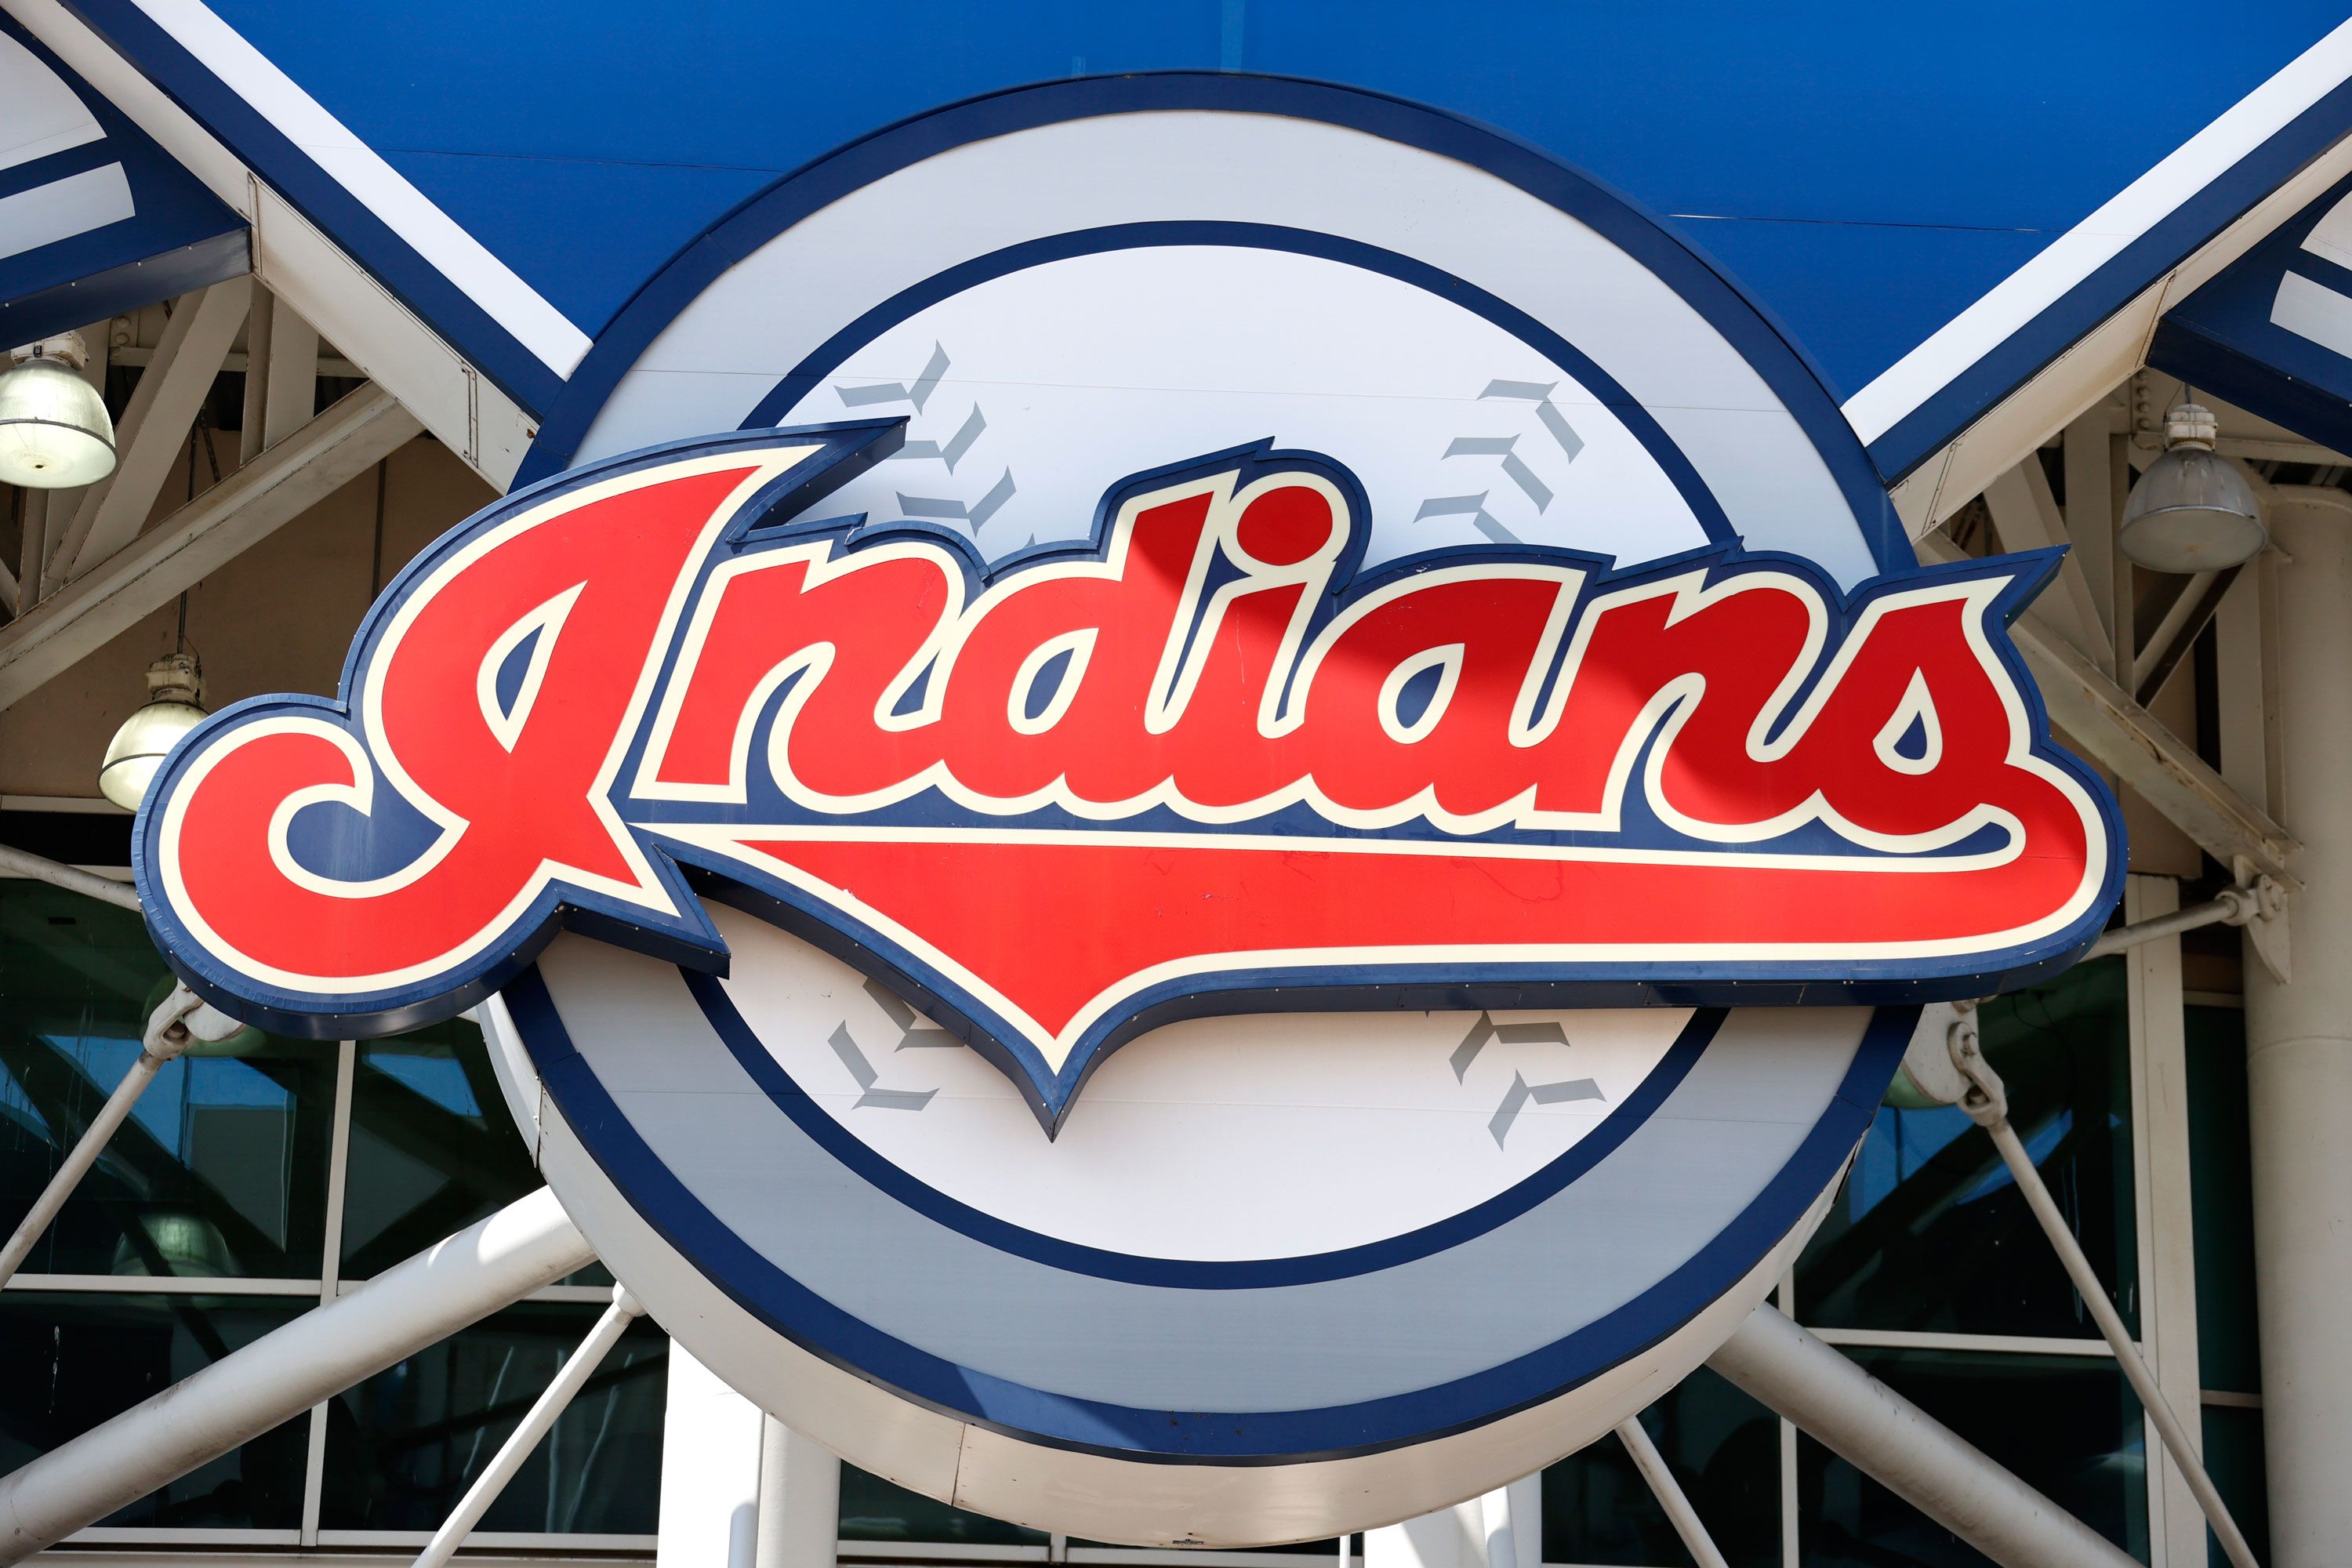 Cleveland Indians name and logo controversy - Wikipedia